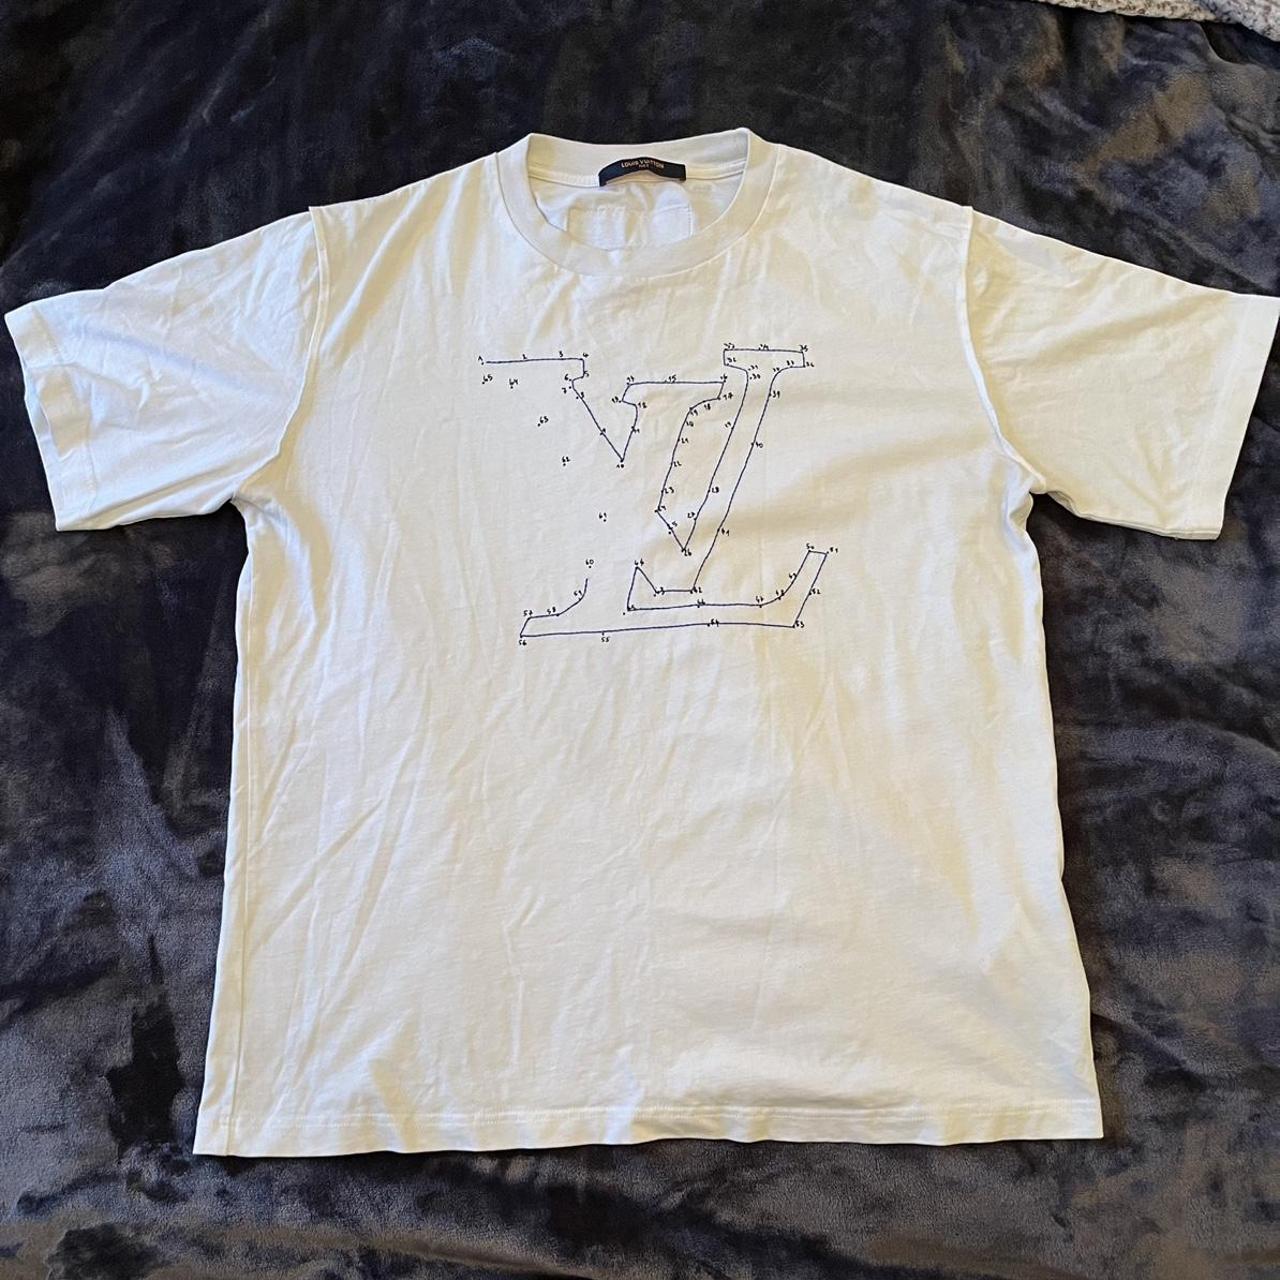 LV STITCH PRINT AND EMBROIDERED T-SHIRT